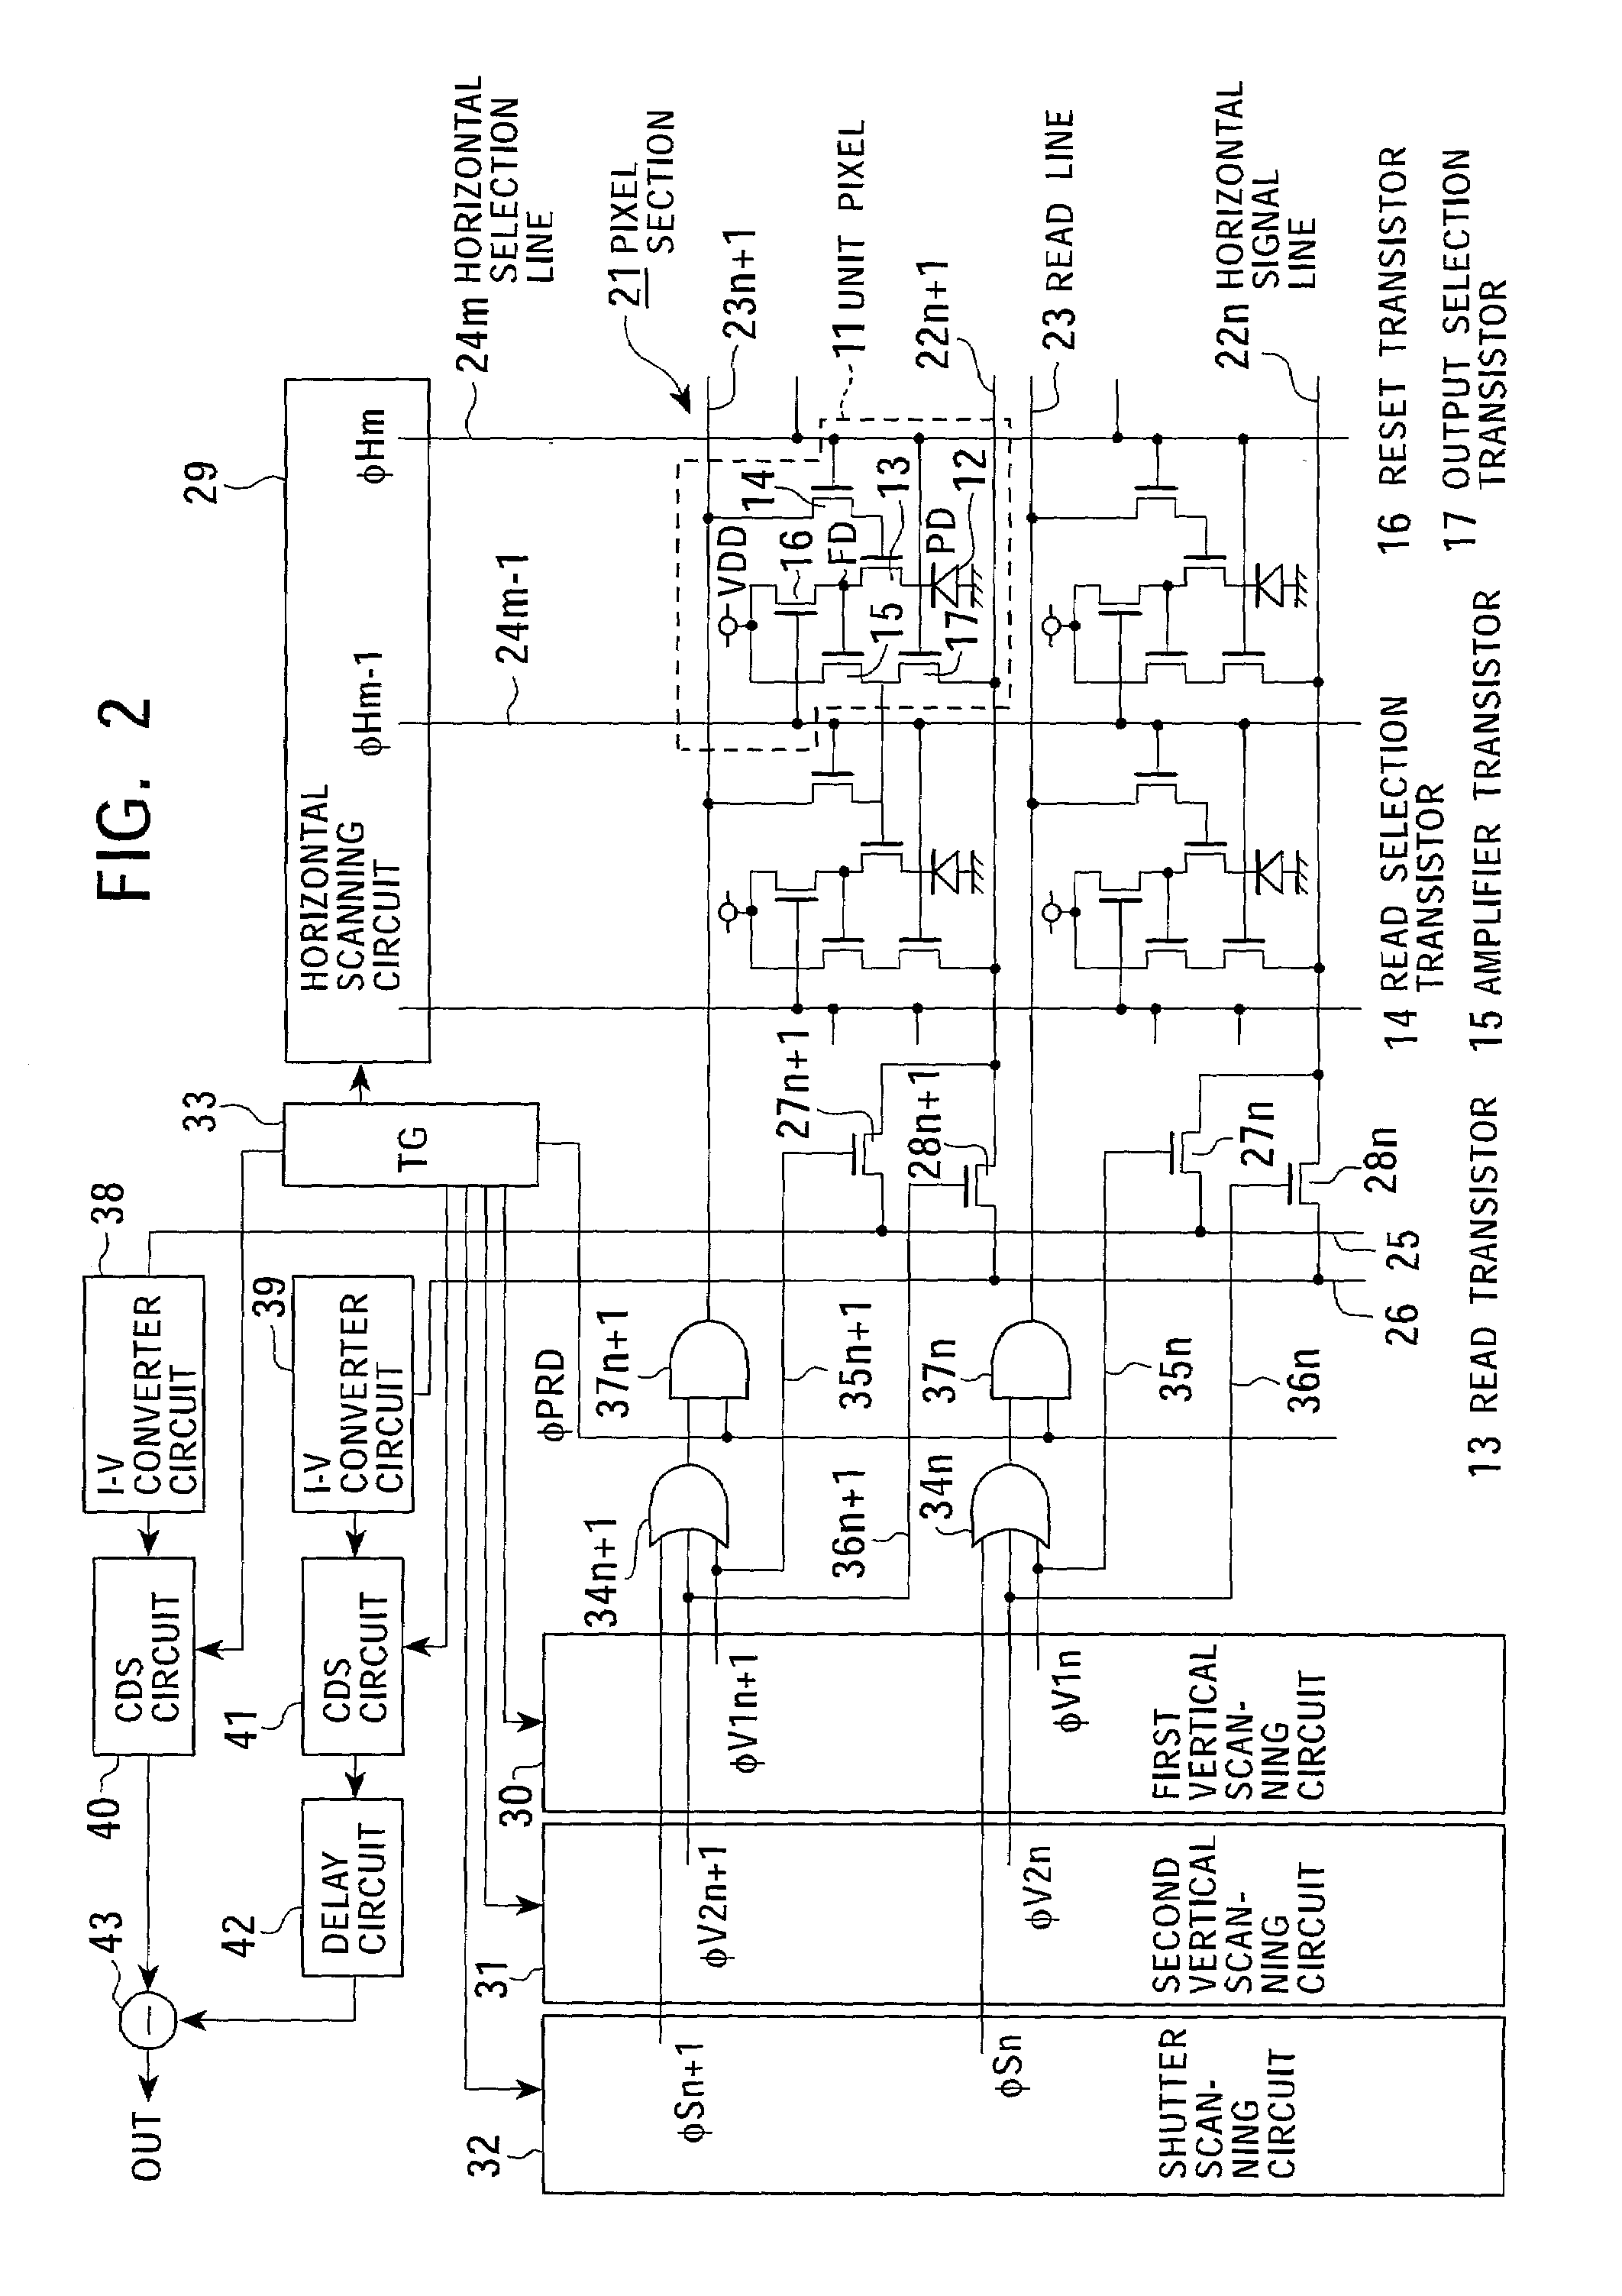 Solid-state image pickup exposure control system and method